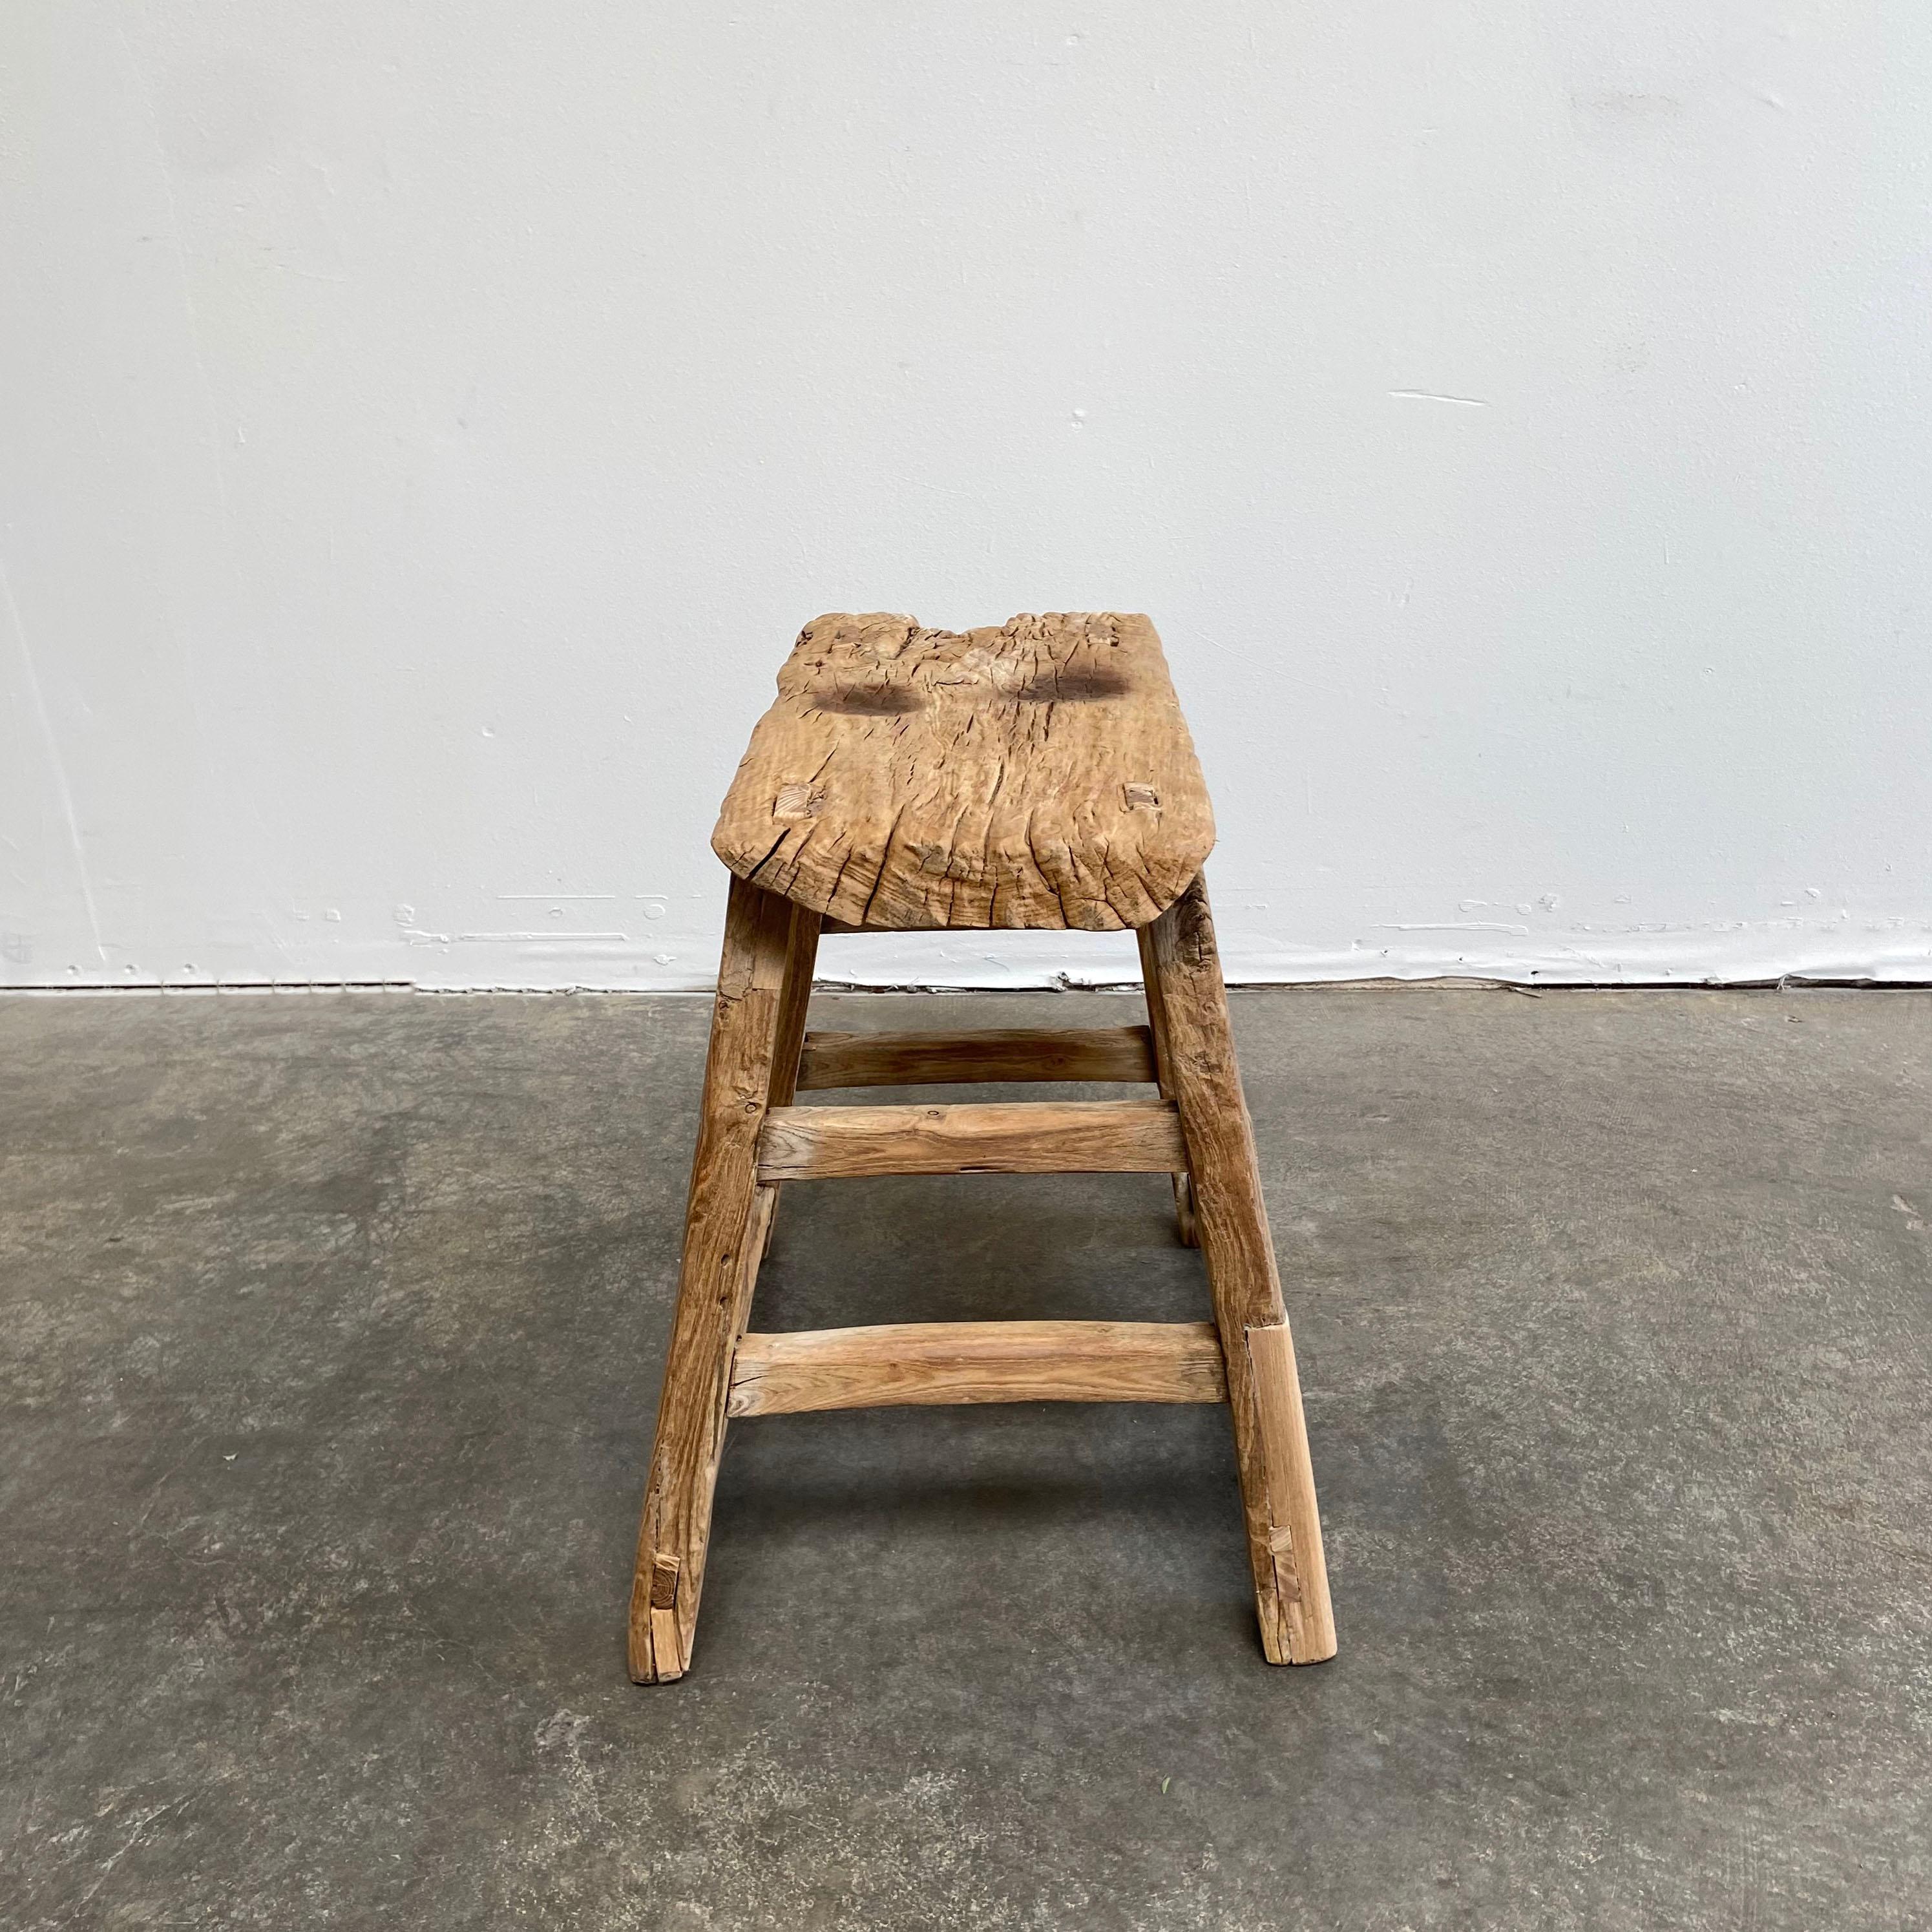 Vintage antique elm wood stool.
These are the real vintage antique elm wood stools! Beautiful antique patina, with weathering and age, these are solid and sturdy ready for daily use, use as a table, stool, drink table, they are great for any space.